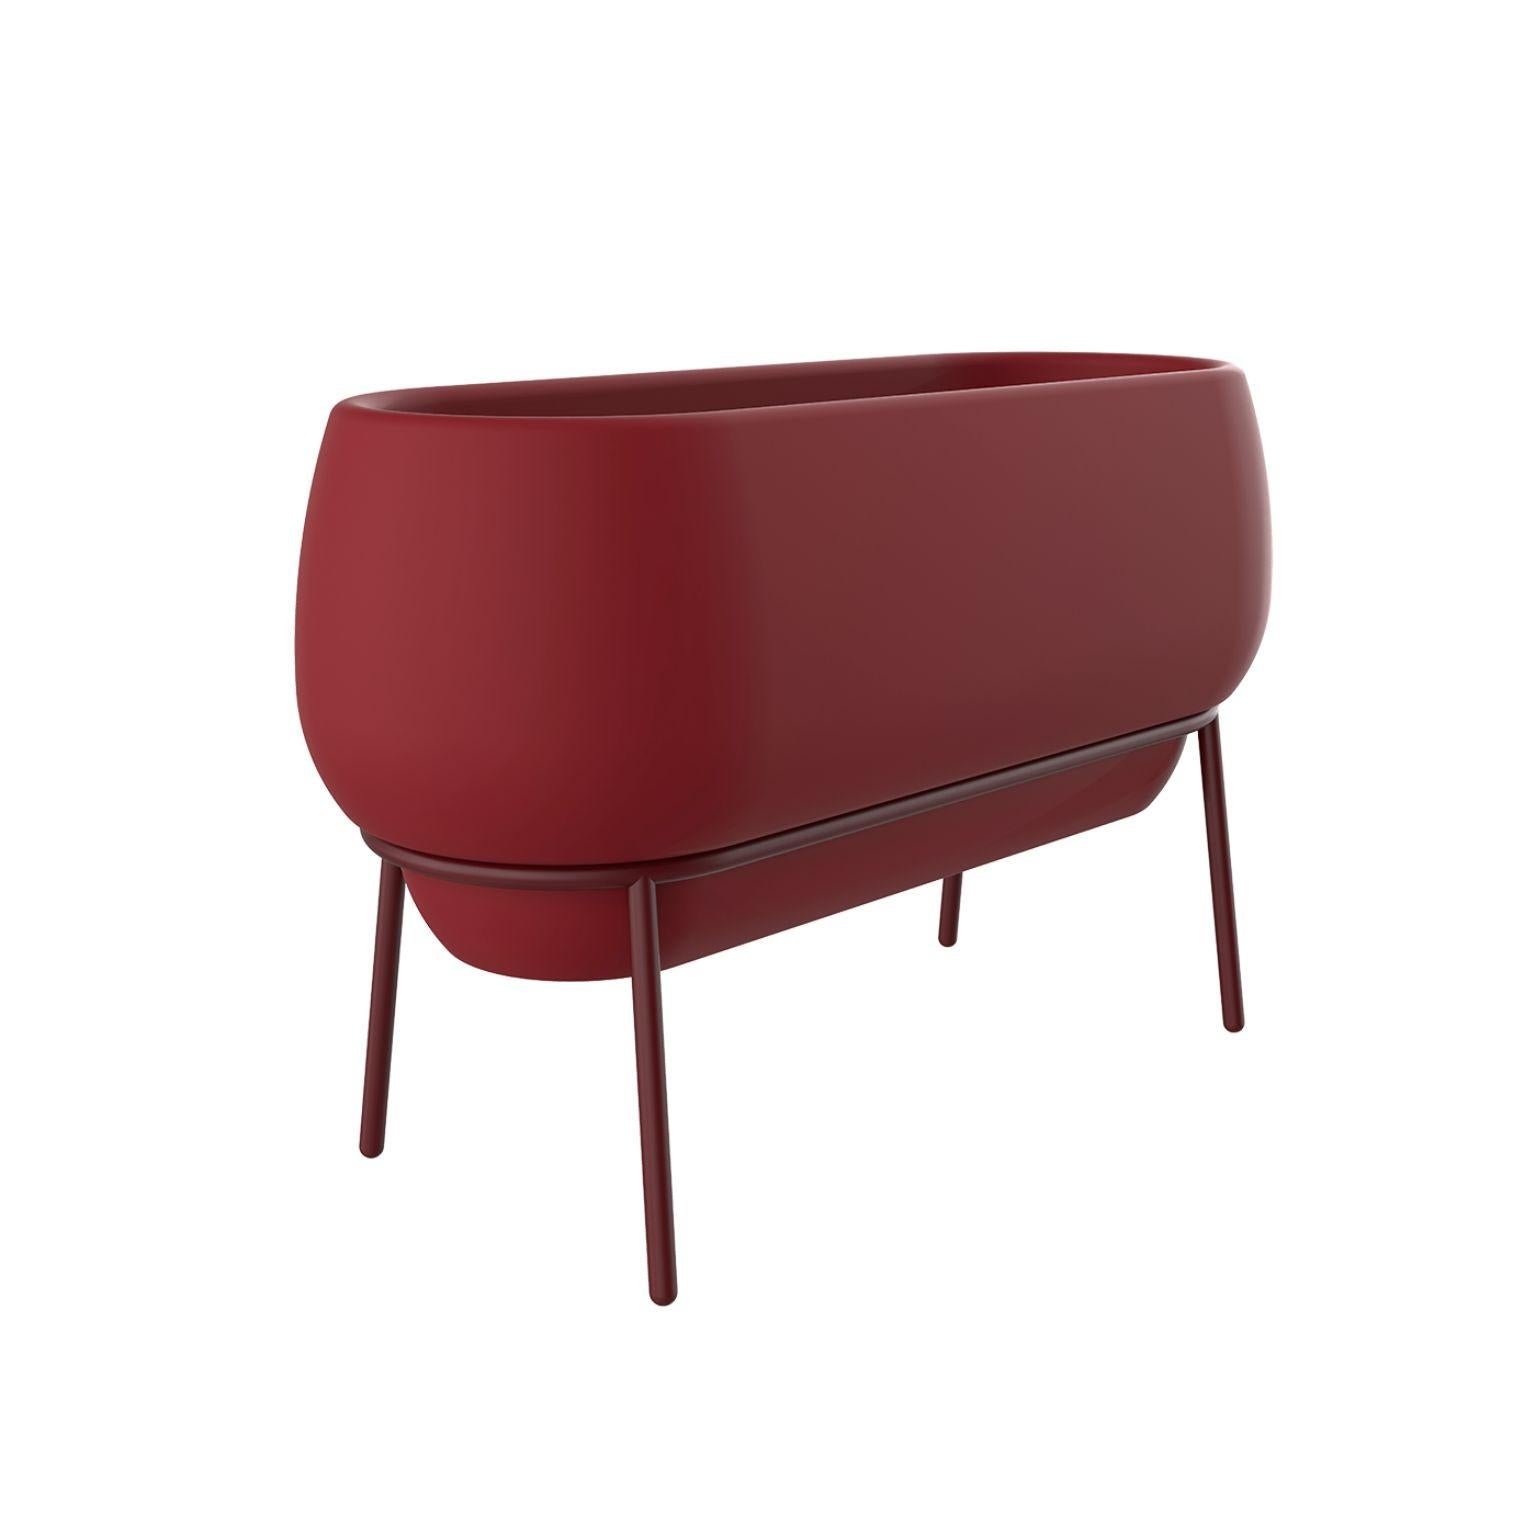 Lace Burgundy planter by Mowee
Dimensions: D50 x W120 x H76 cm
Material: Polyethylene and stainless steel.
Weight: 13.5 kg.
Also available in different colours and finishes. (Lacquered or retroilluminated).

Lace is a collection of furniture